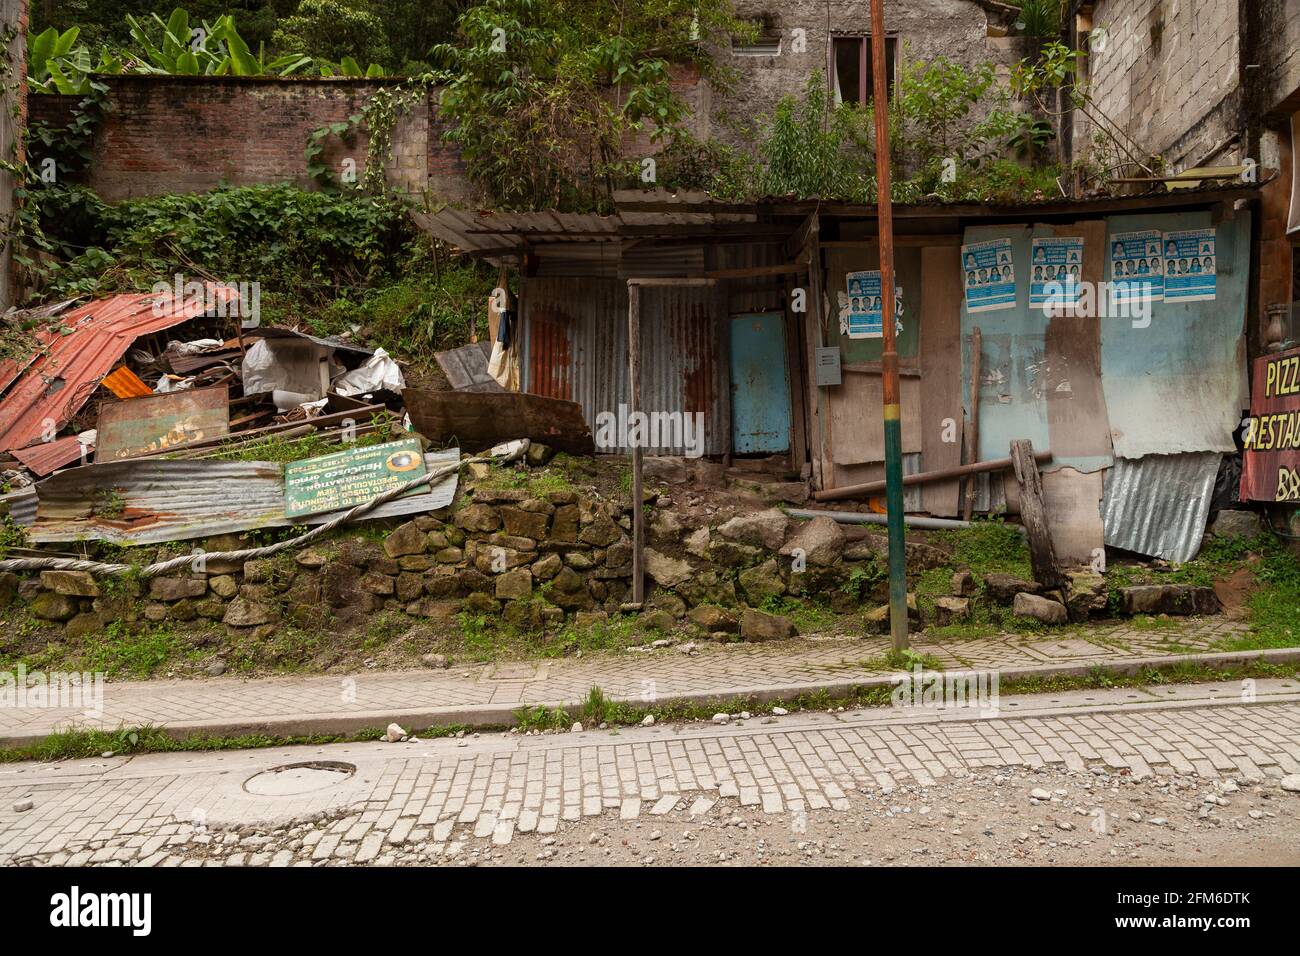 Aguas Calientes, Peru - April 06, 2014: Neighborhood of old and abandoned houses, on the outskirts of the municipality of Aguas Calientes, near the Ur Stock Photo